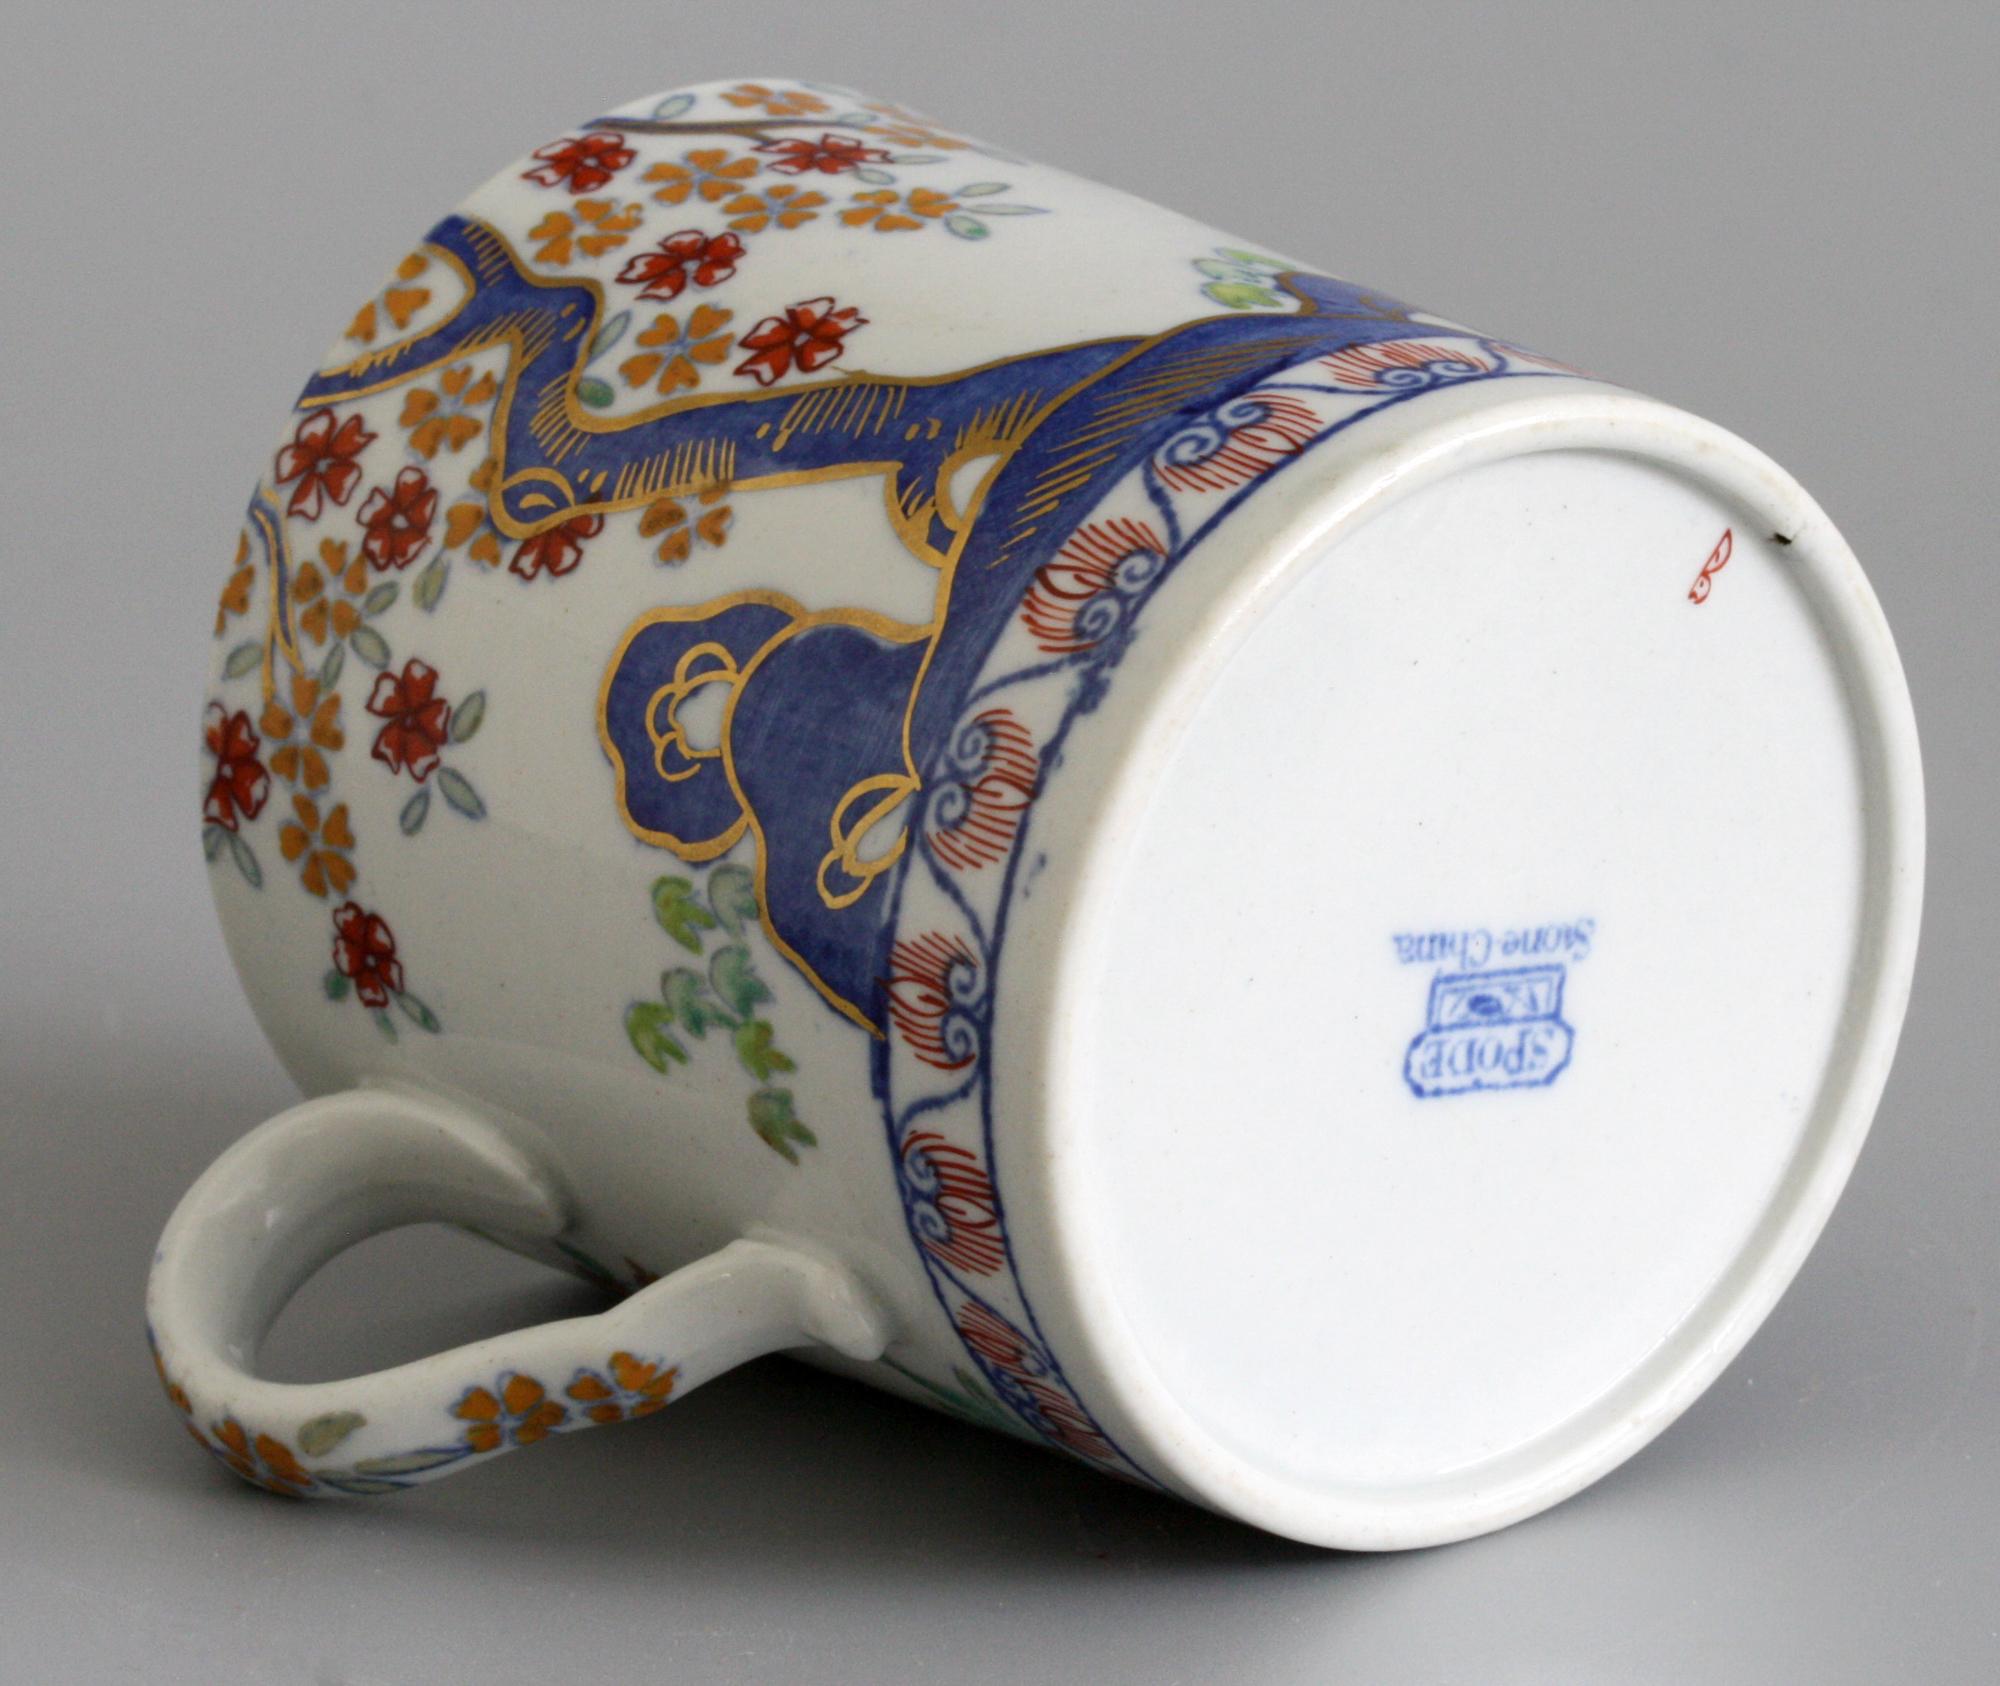 English Spode Stone China Coffee Can with Tree in Landscape Pattern 2117, circa 1815